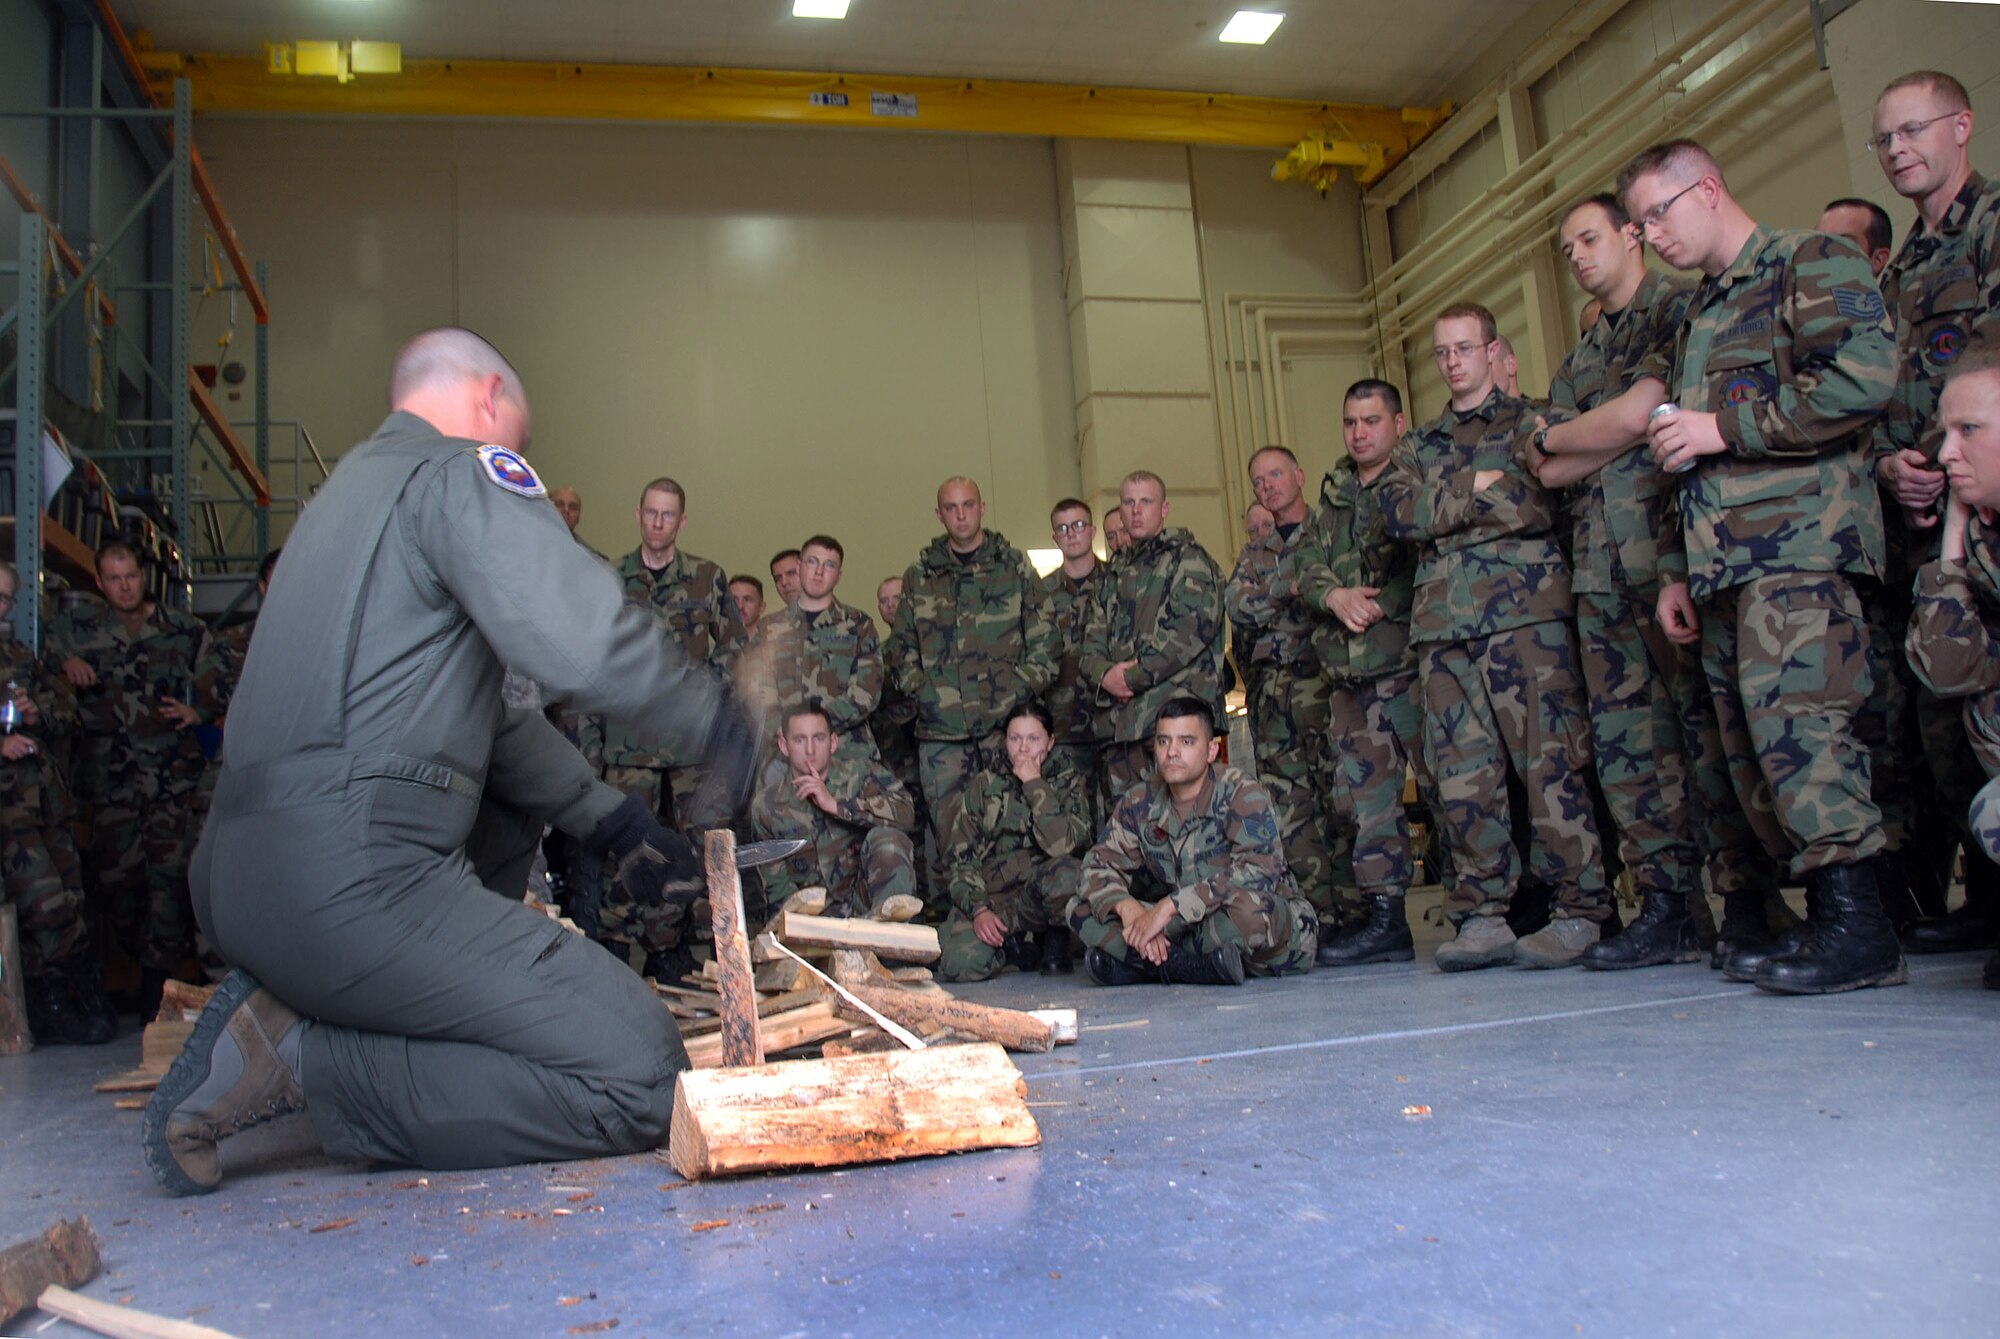 Tech. Sgt. Kenneth Walter a 28th Operations Support Squadron/SERE (Survival, Evasion, Resistance & Escape) Instructor, demonstrates how to safely cut up wood for the use of a fire to members of the 137th Space Warning Squadron, June 9, 2009 at Ellsworth Air Force Base, South Dakota.  Members of the 137th SWS located in Greeley Colorado, are participating in several training events such as SERE training while at Ellsworth AFB this week to further enhance their one of a kind worldwide capable mission as a missile warning , space launch and detection mobile unit. (U.S Air Force photo by: Tech. Sgt. Wolfram M. Stumpf/Released)